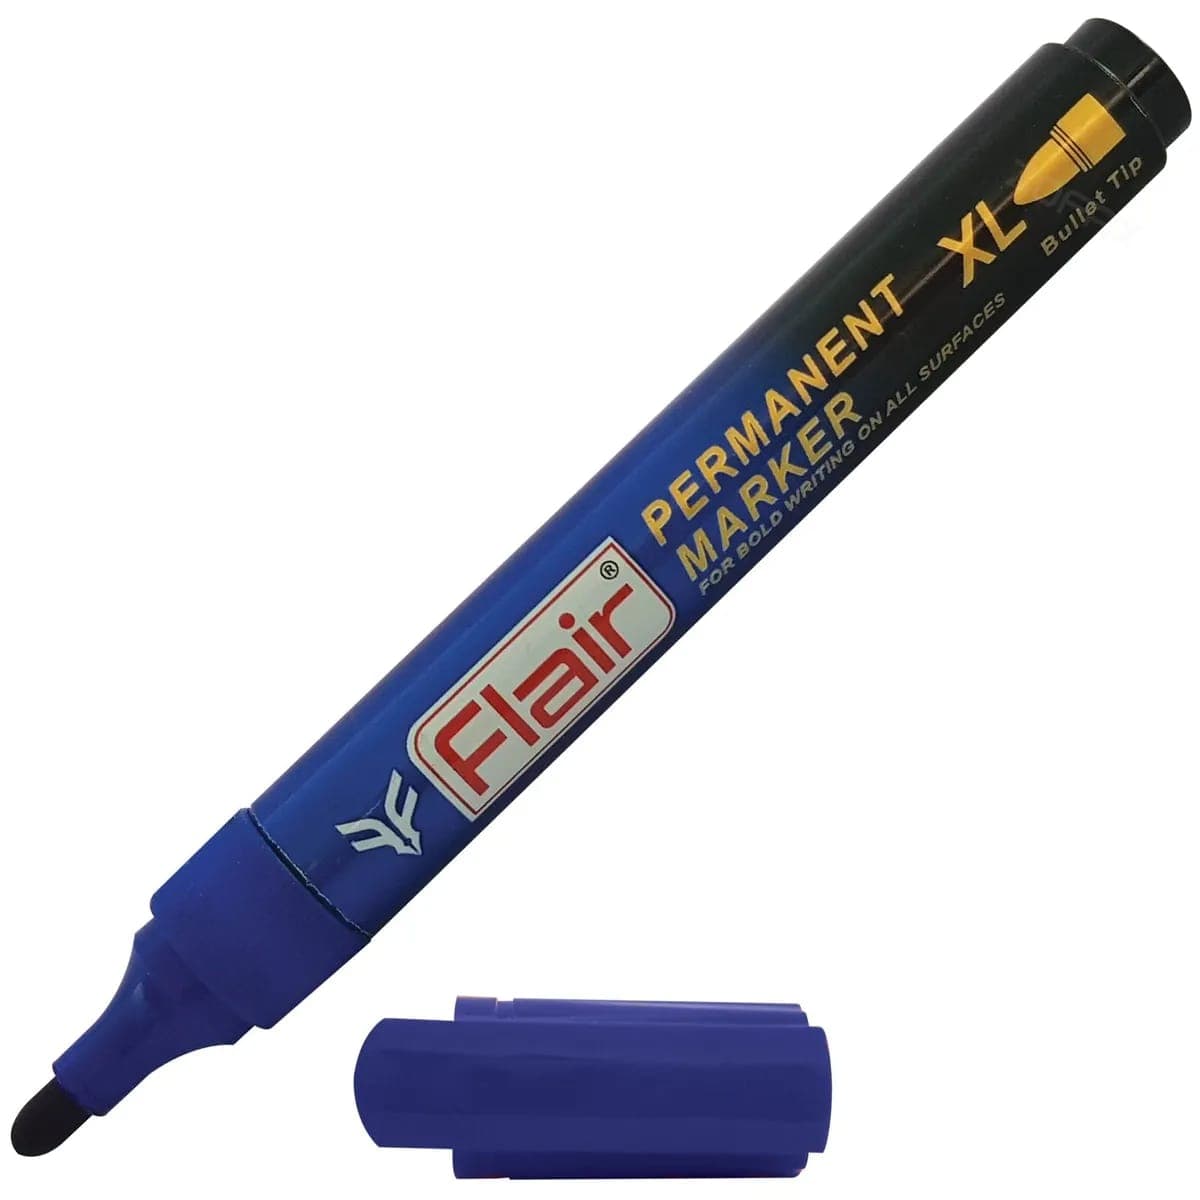 parshwa Traders Highlighters & Markers BLUE Flair Permanent Marker for Bold Writing on All Surfaces - Bullet Tip